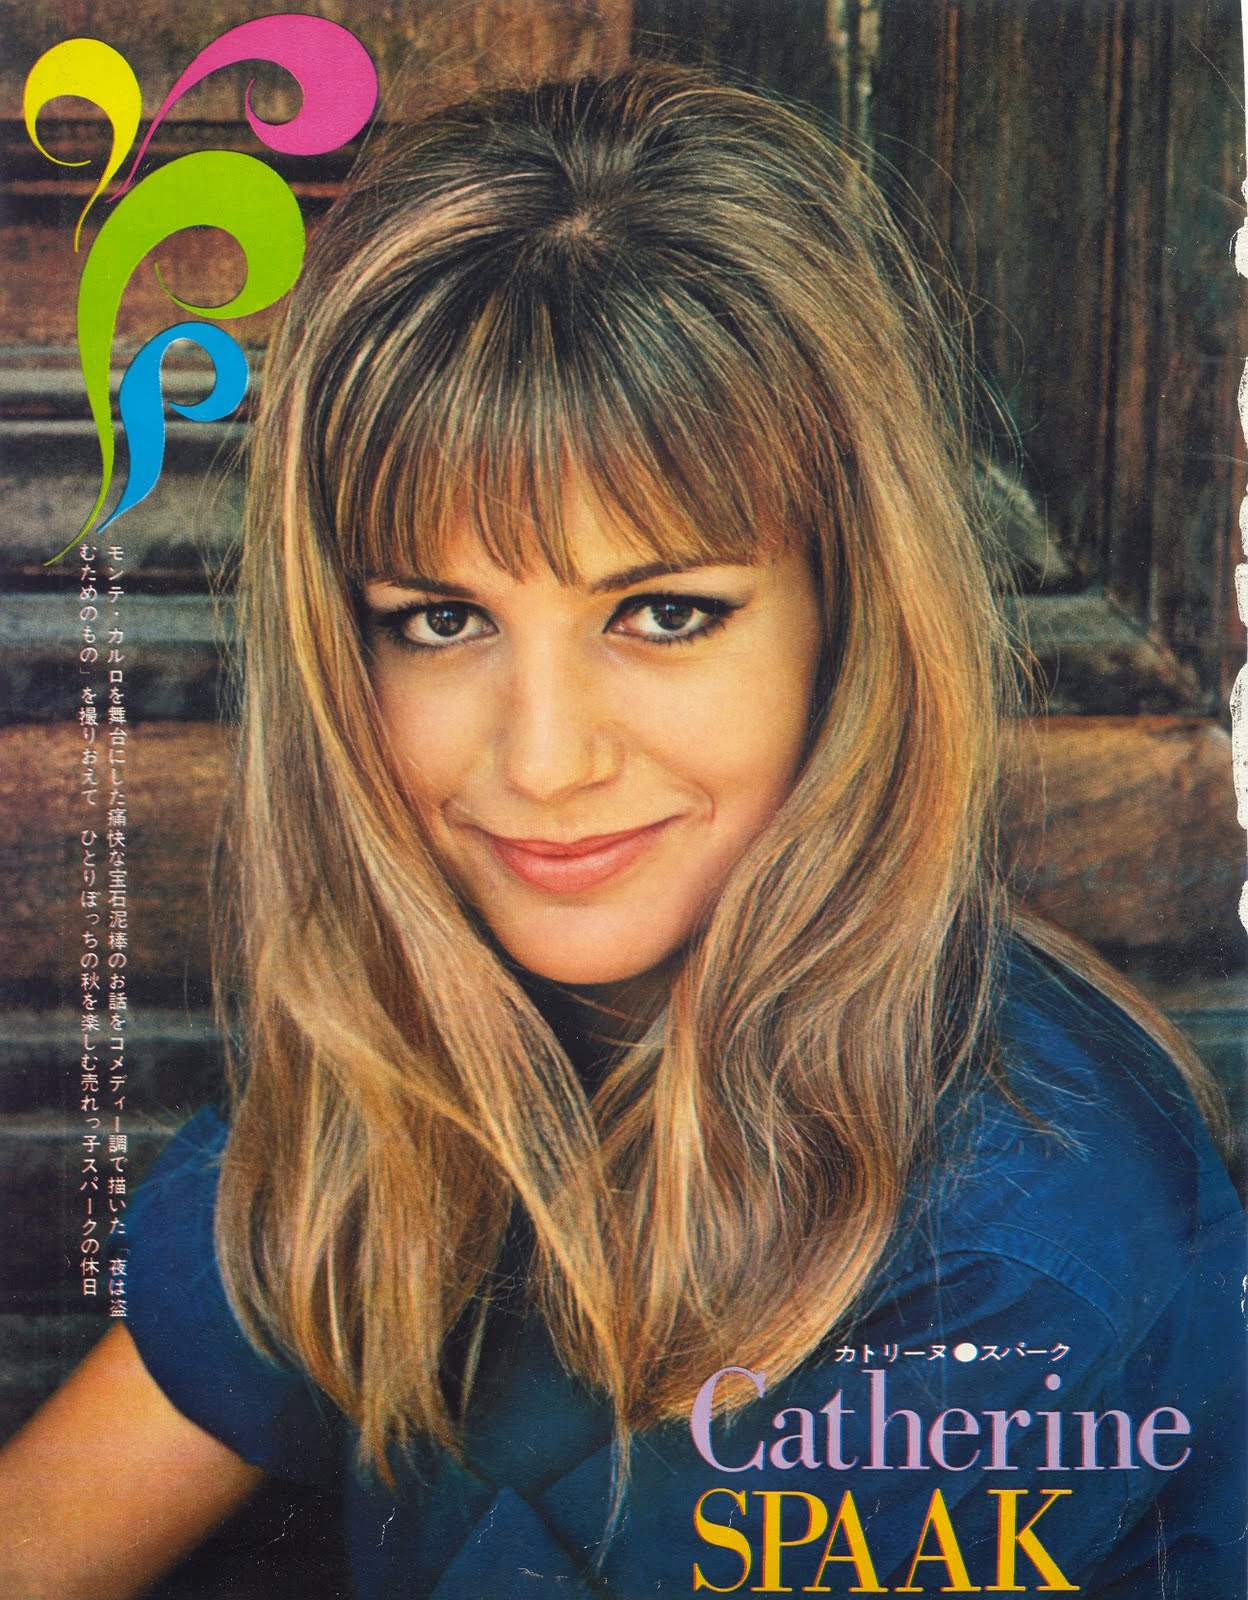 Slice of Cheesecake: Catherine Spaak, pictorial